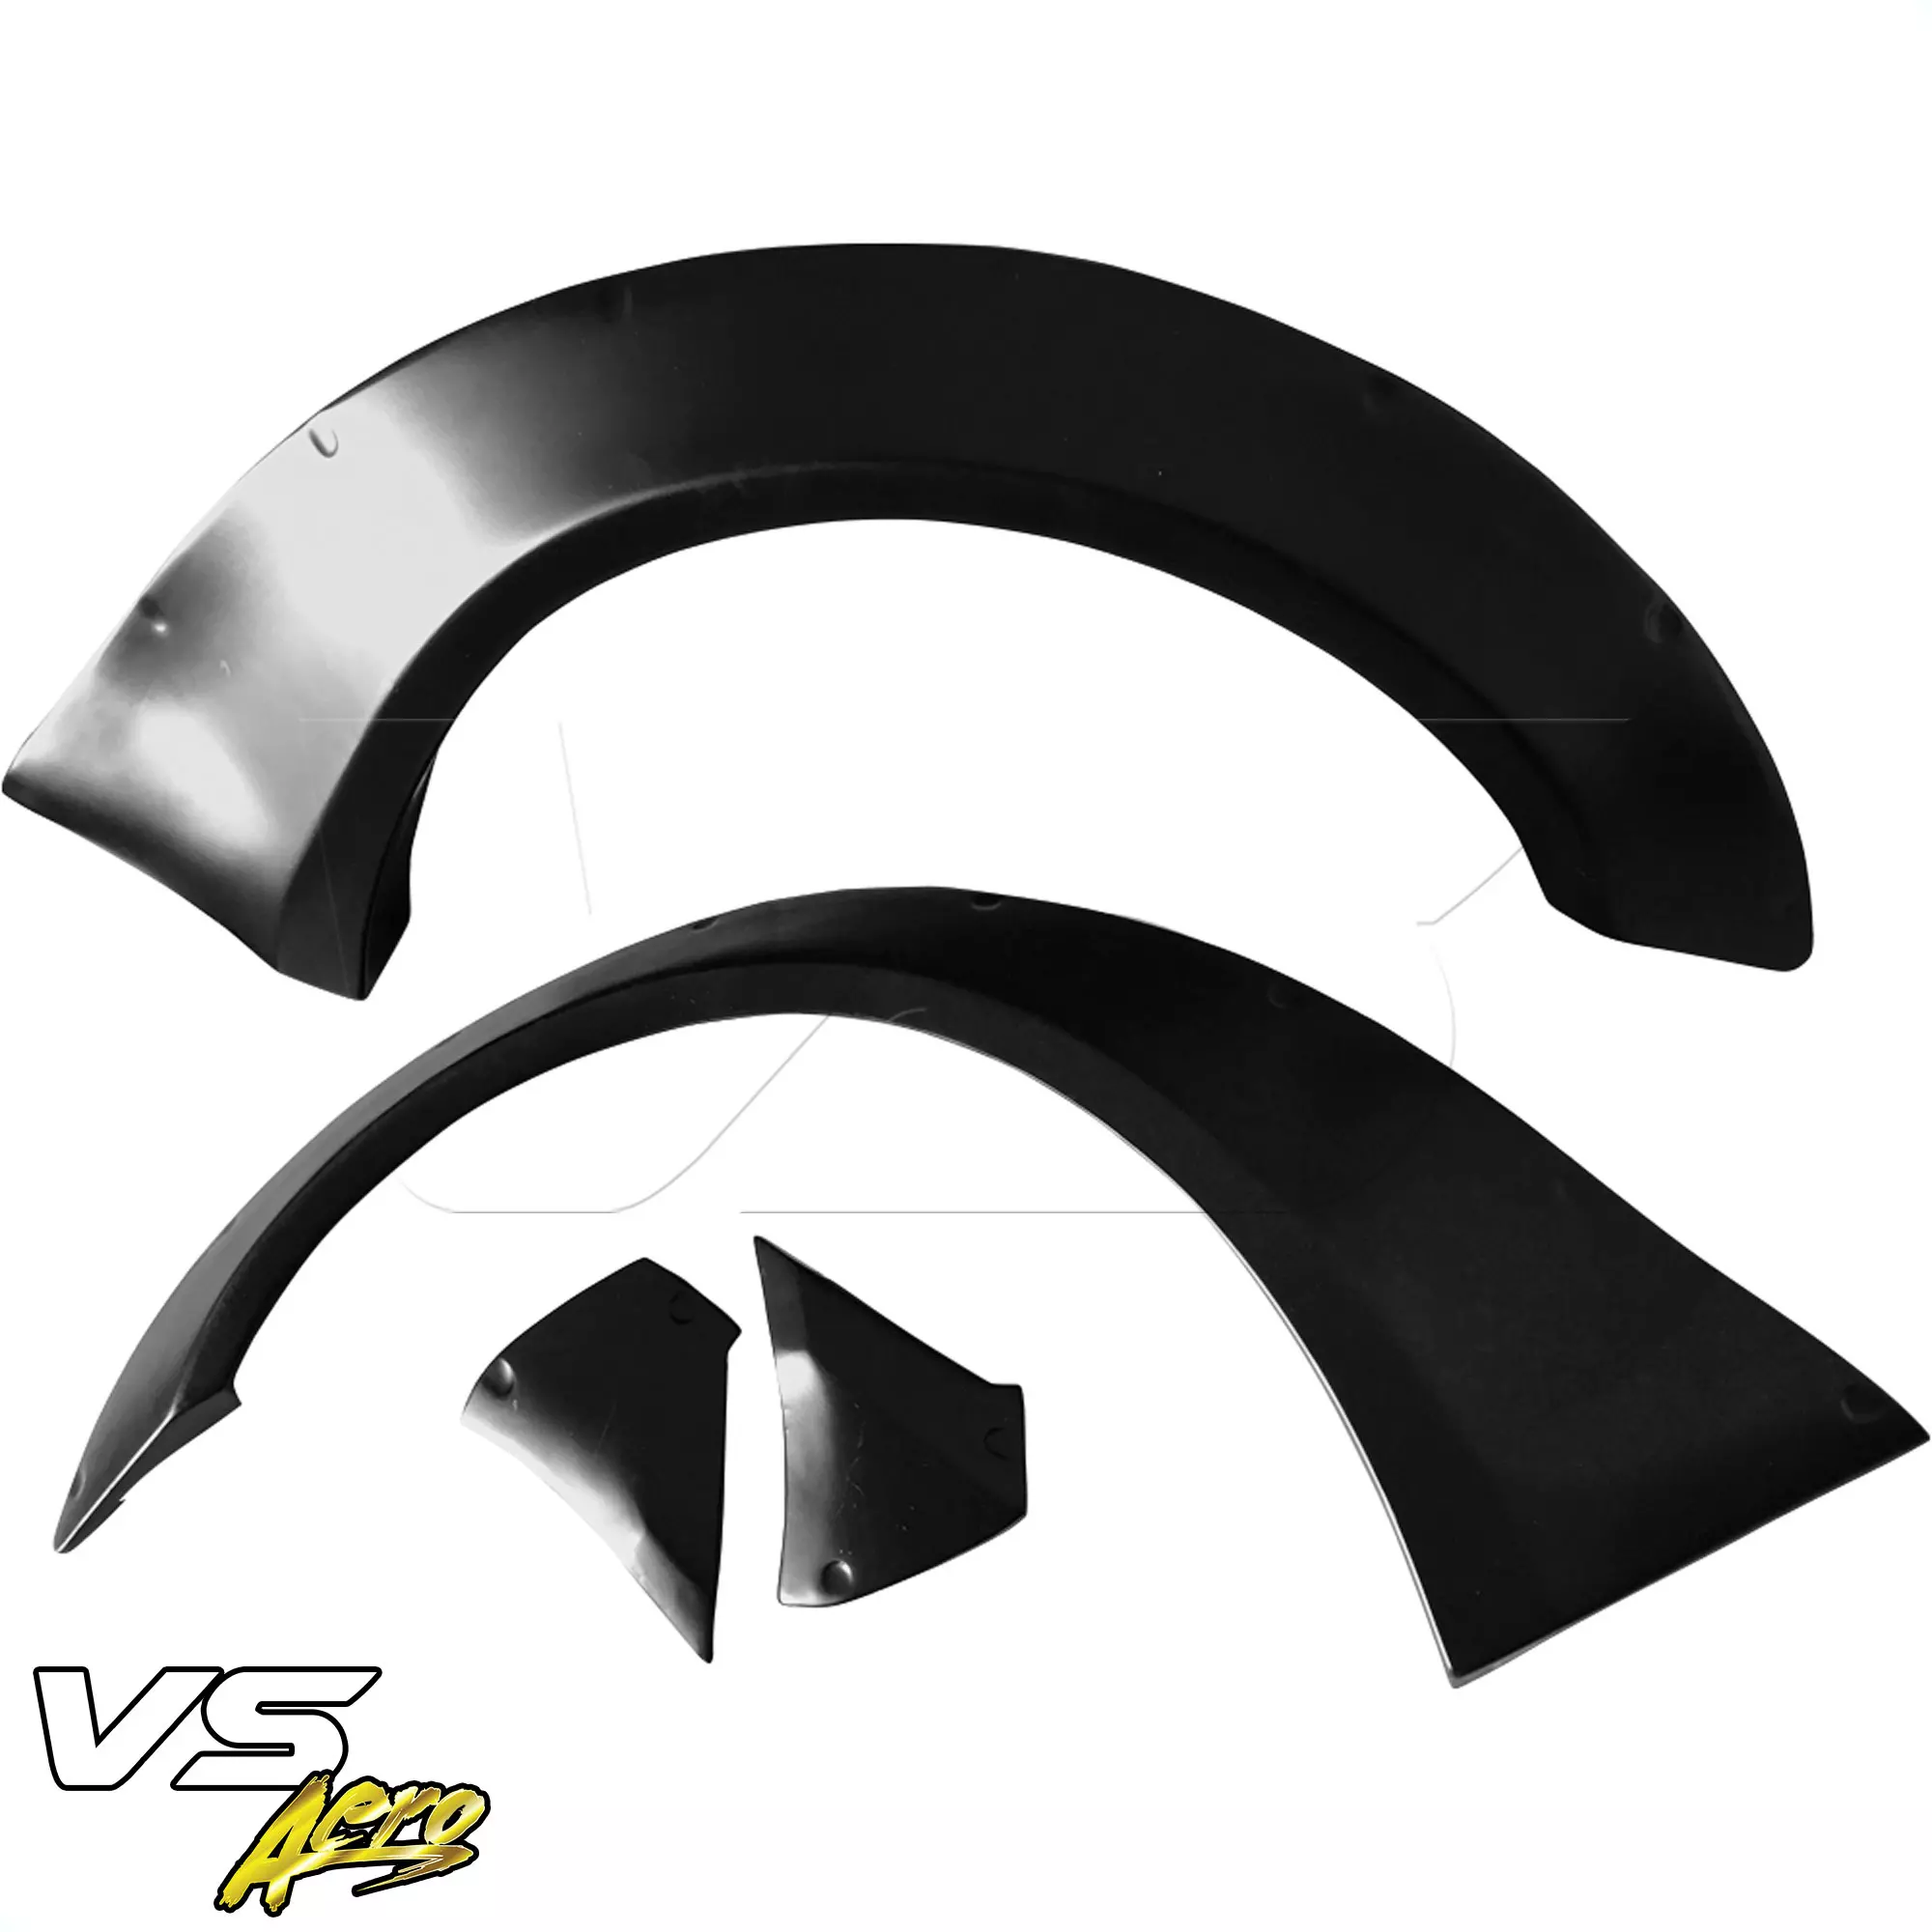 VSaero FRP LBPE Wide Body Fender Flares (front) 4pc > Infiniti G37 Coupe 2008-2015 > 2dr Coupe - Image 13